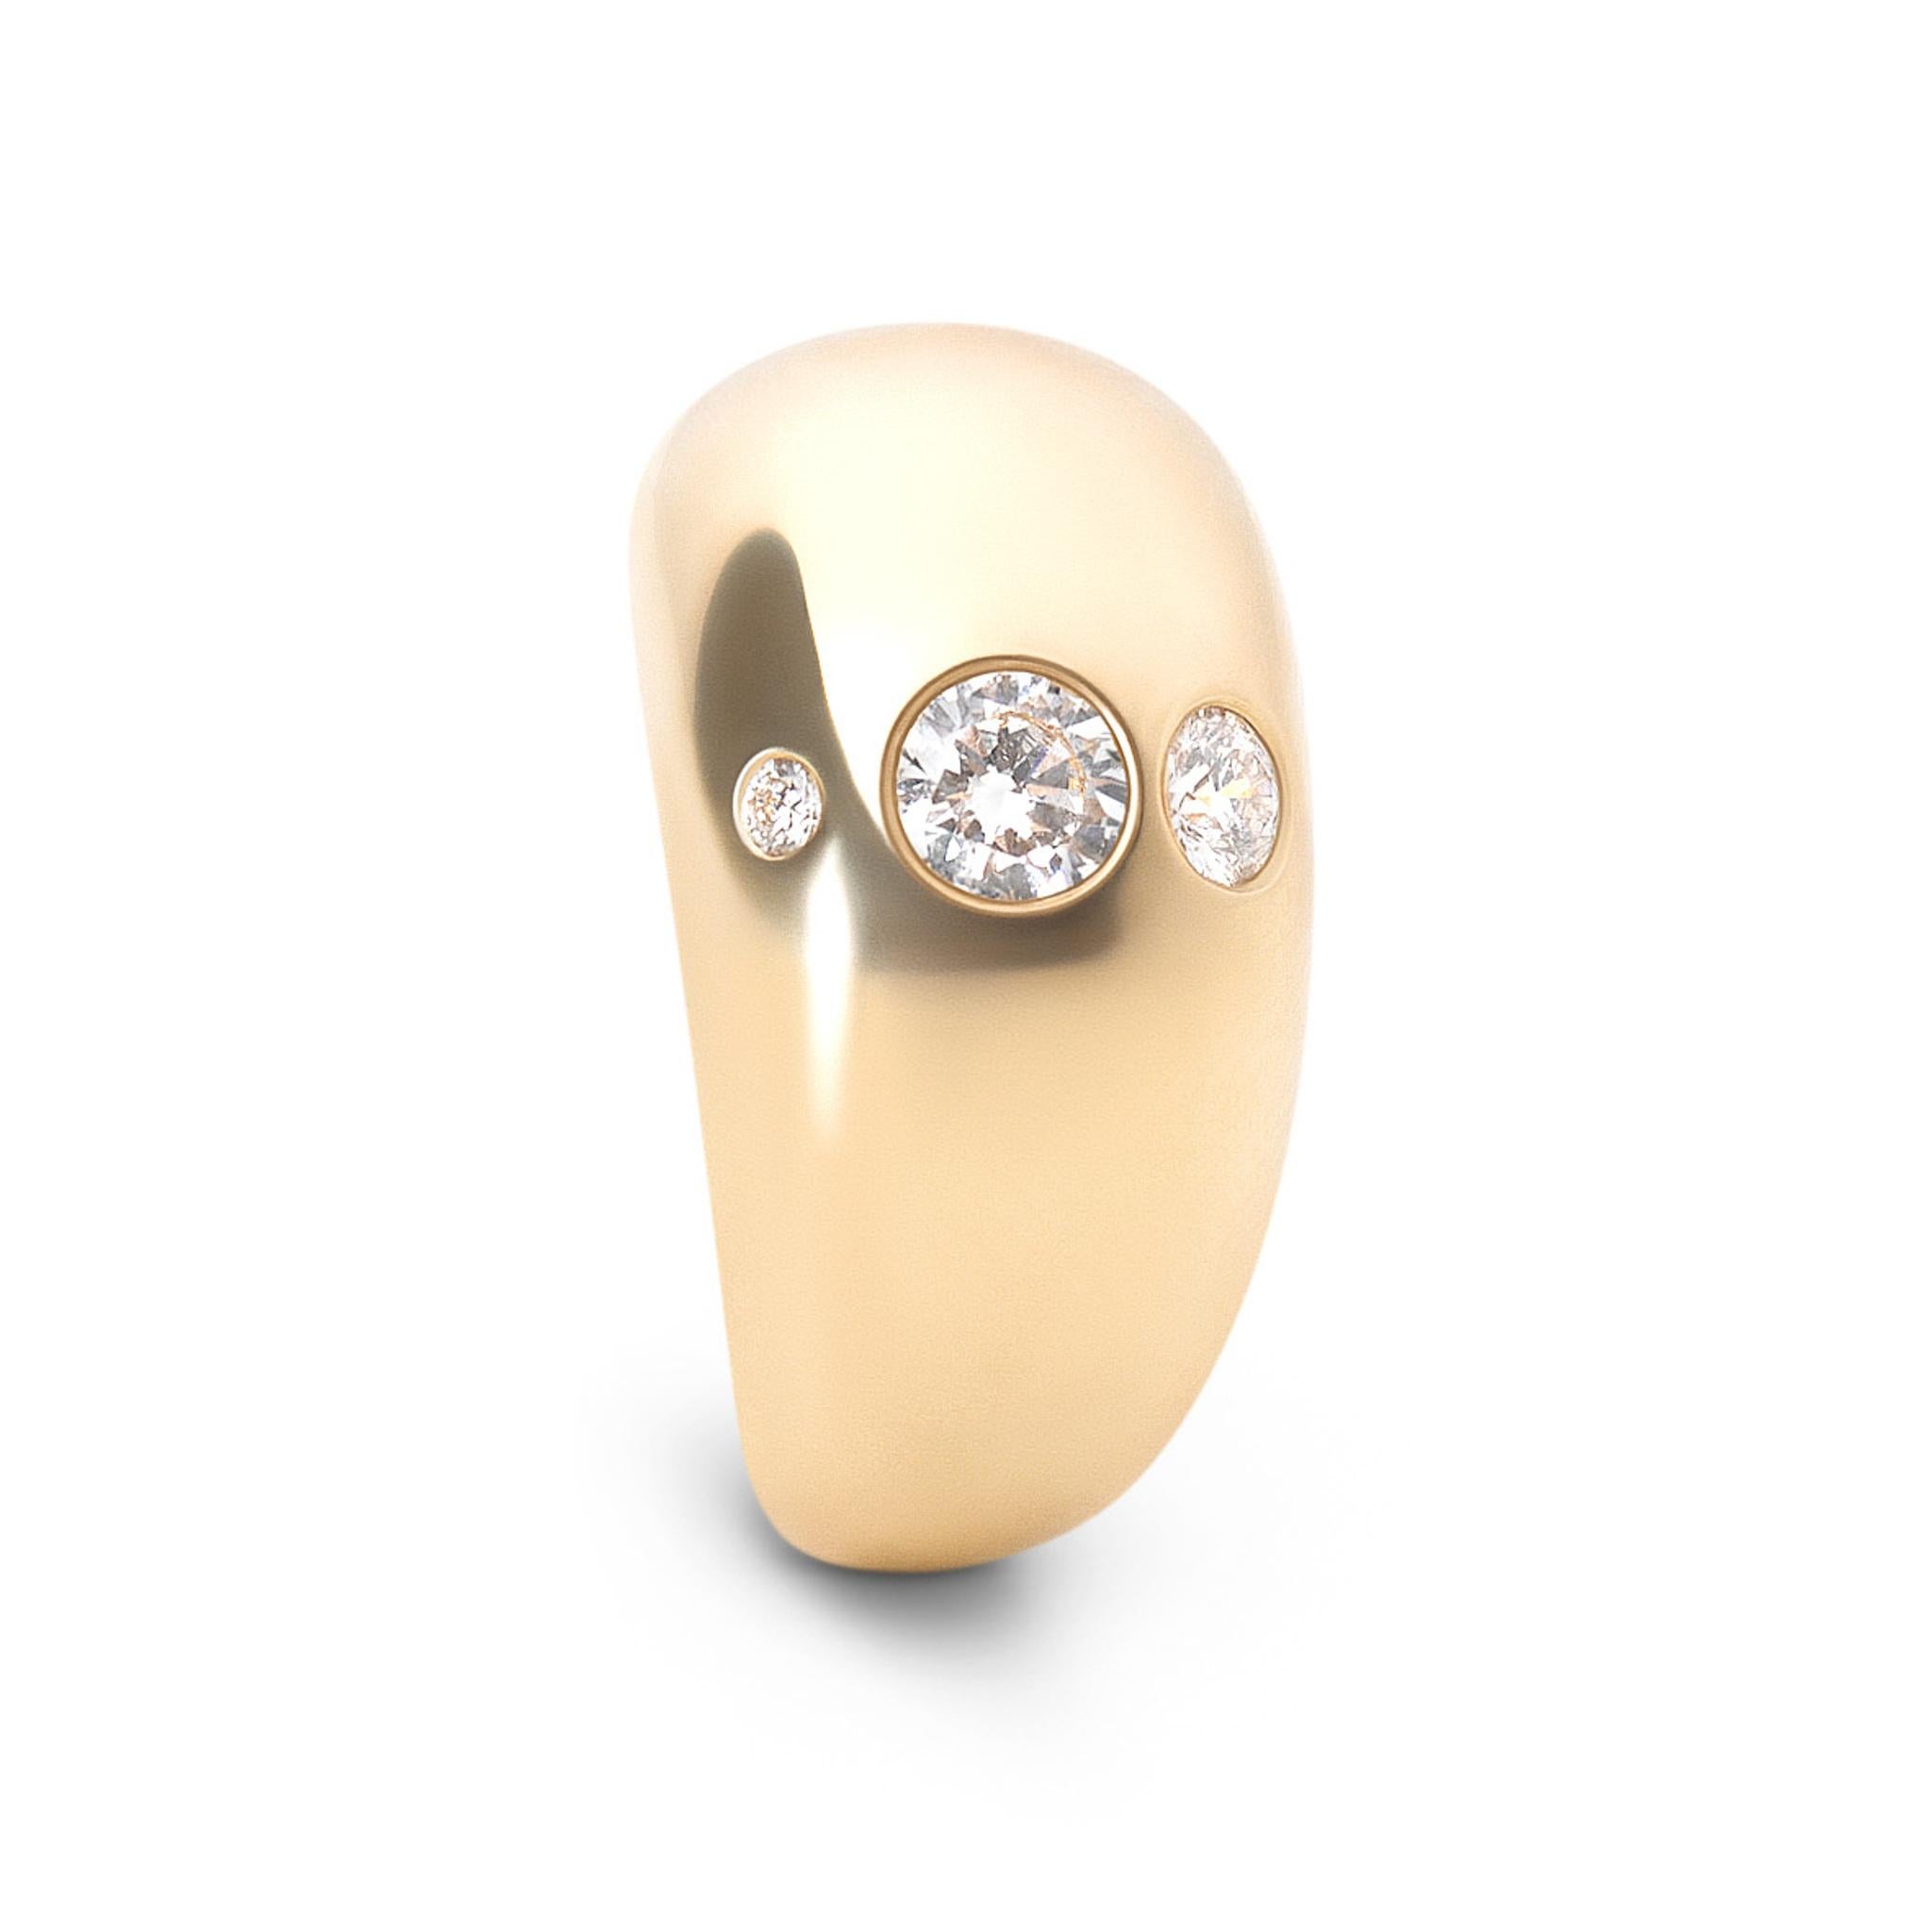 For Sale:  Ellipsis Dome Ring in 18k Yellow Gold and White Diamonds